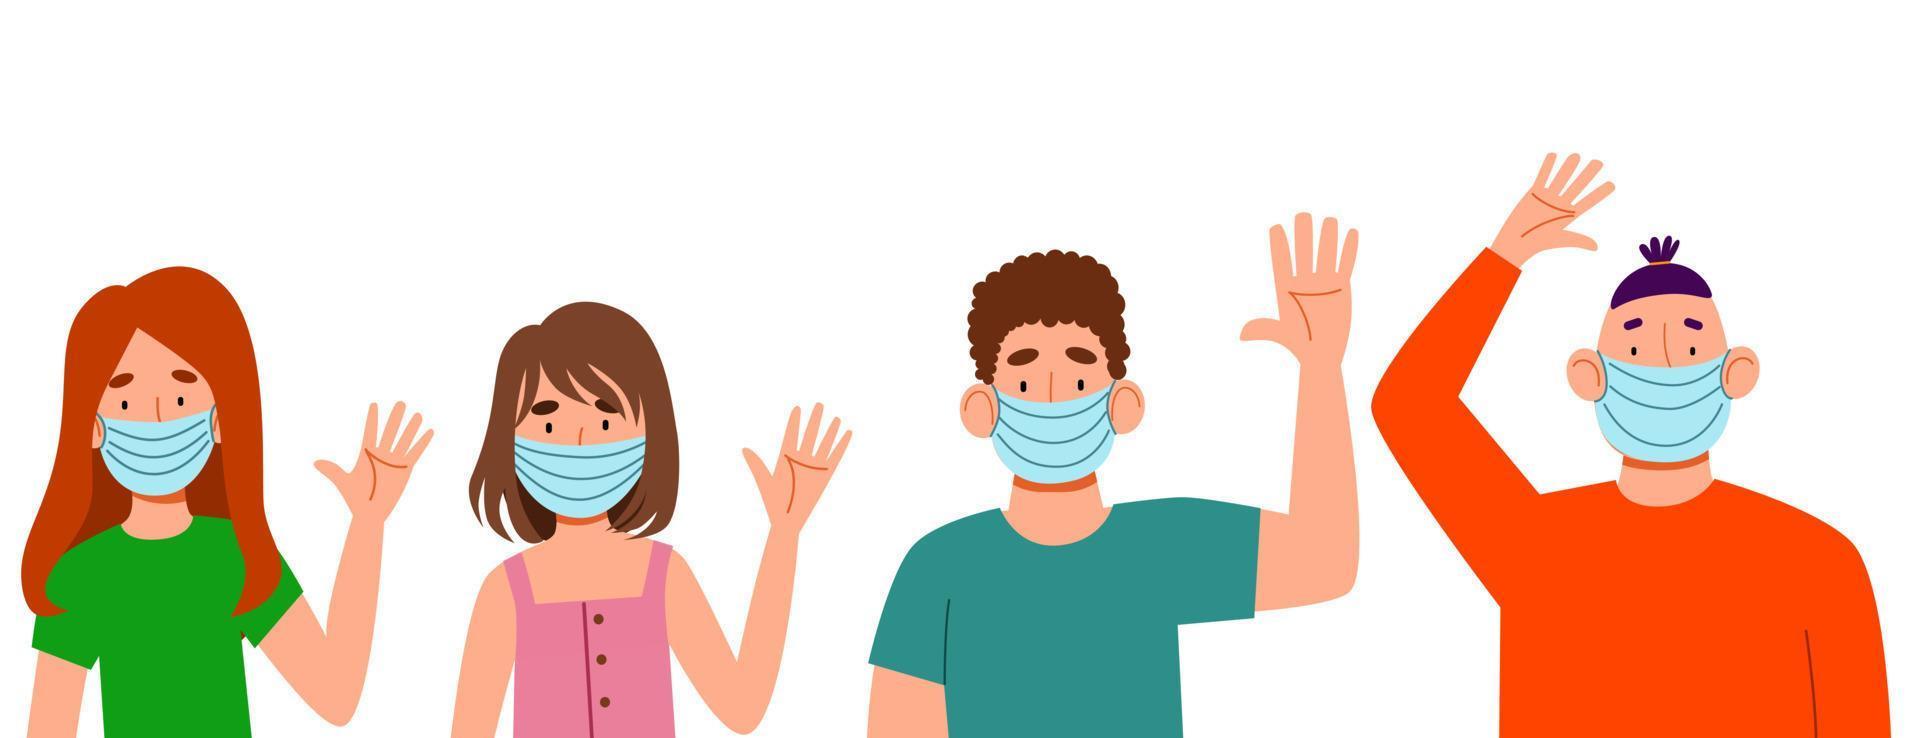 Fashionable men and women in medical masks say hello. A set of flat vector illustrations with a gesture of greeting people.